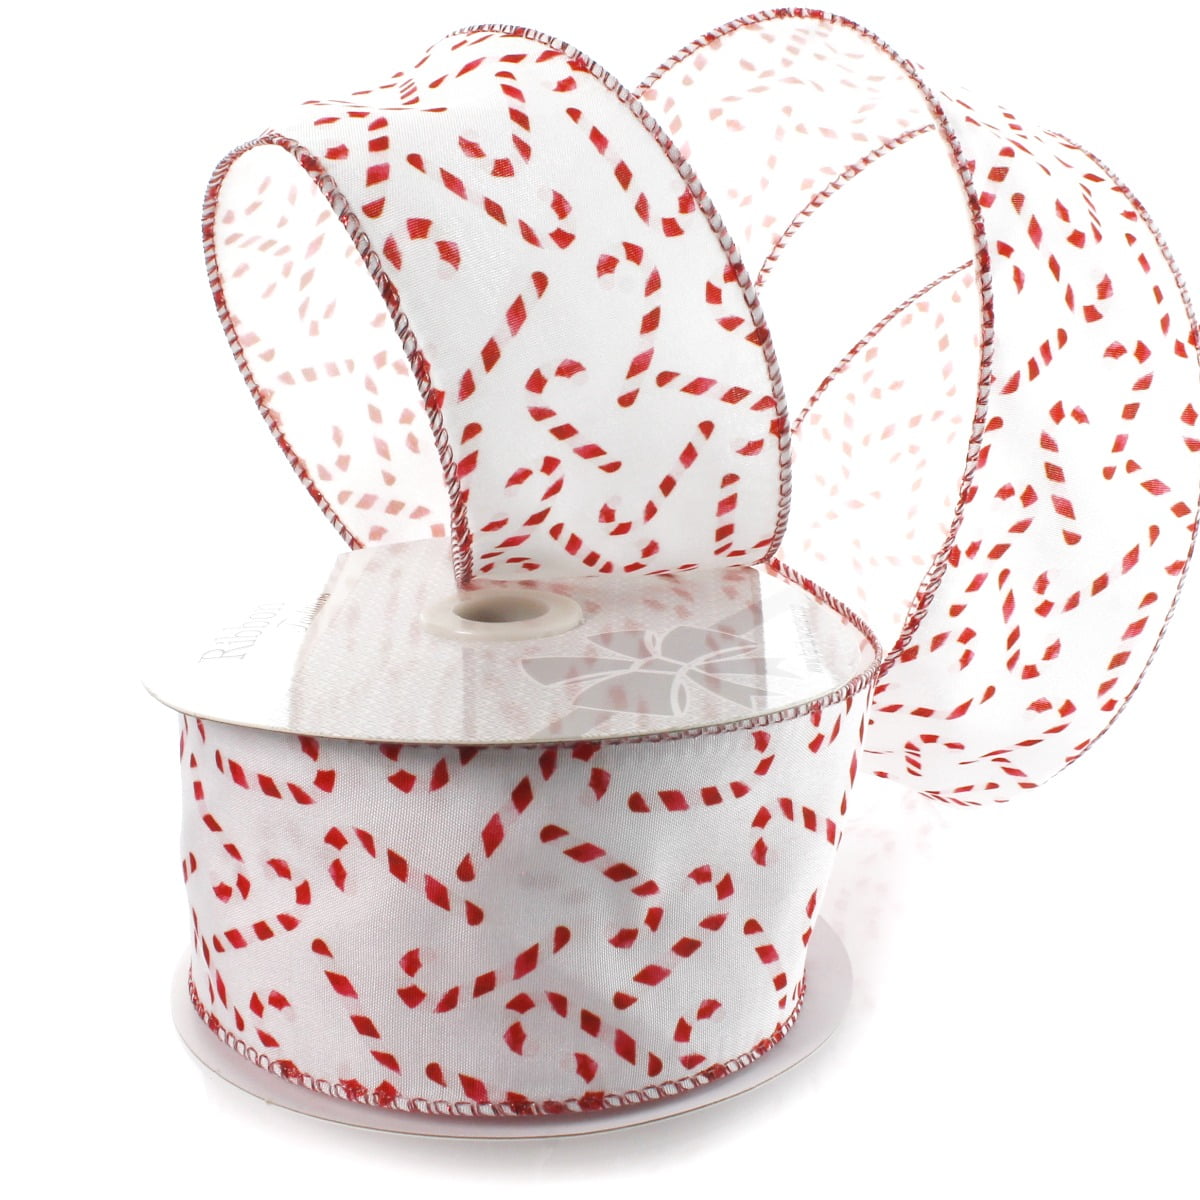 Red Glitter Hearts on White Wired Ribbon - Multi